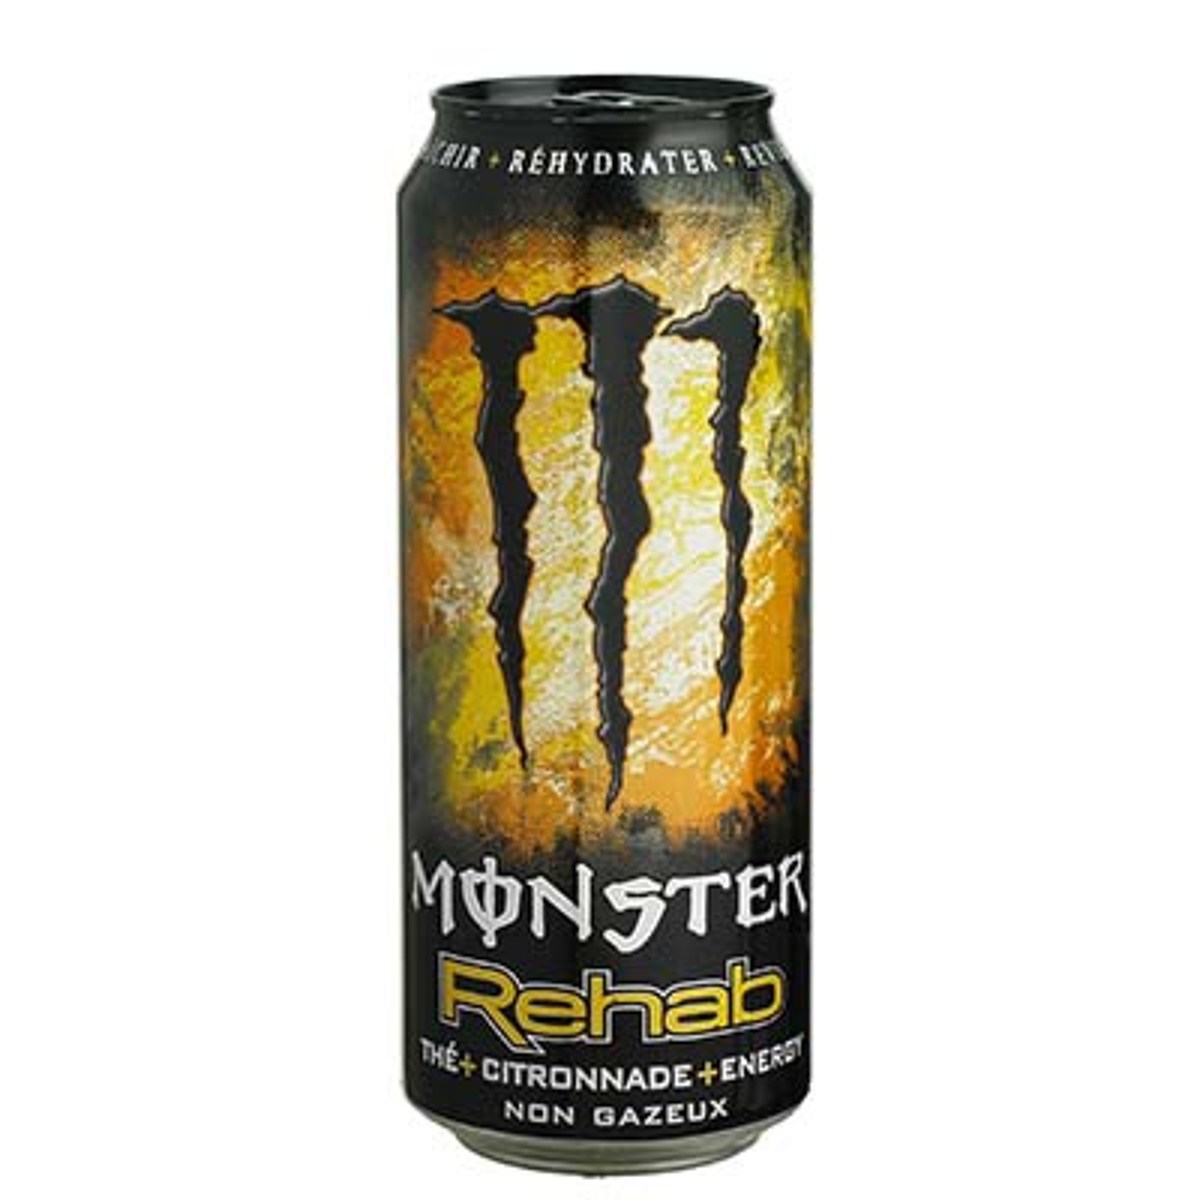 BTE 50CL MONSTER PUNCH